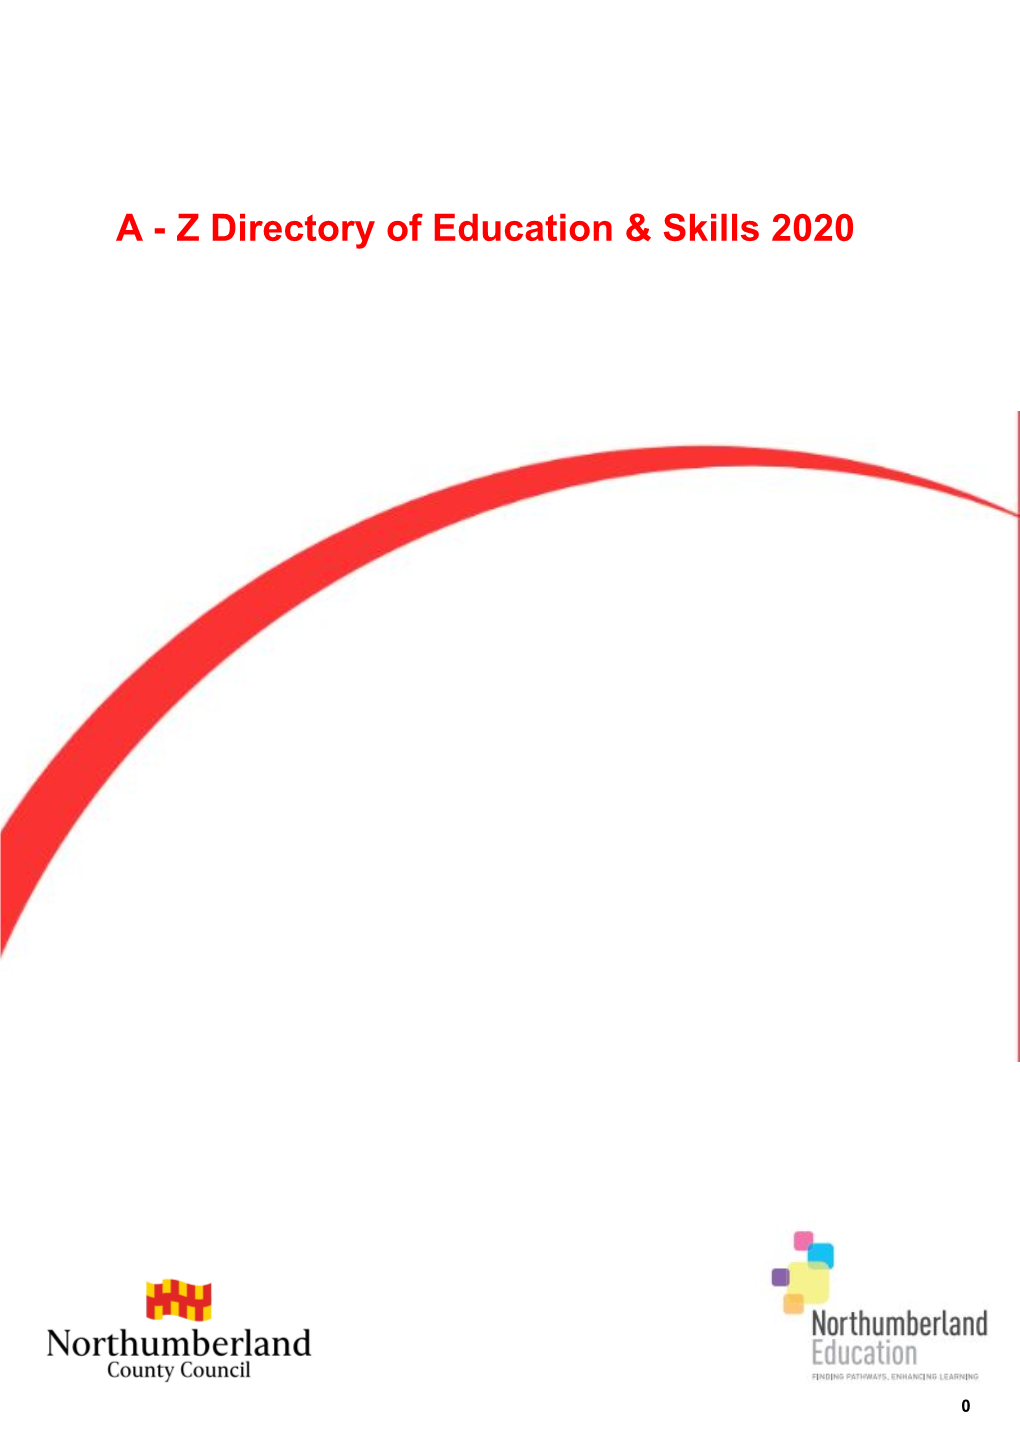 A - Z Directory of Education & Skills 2020